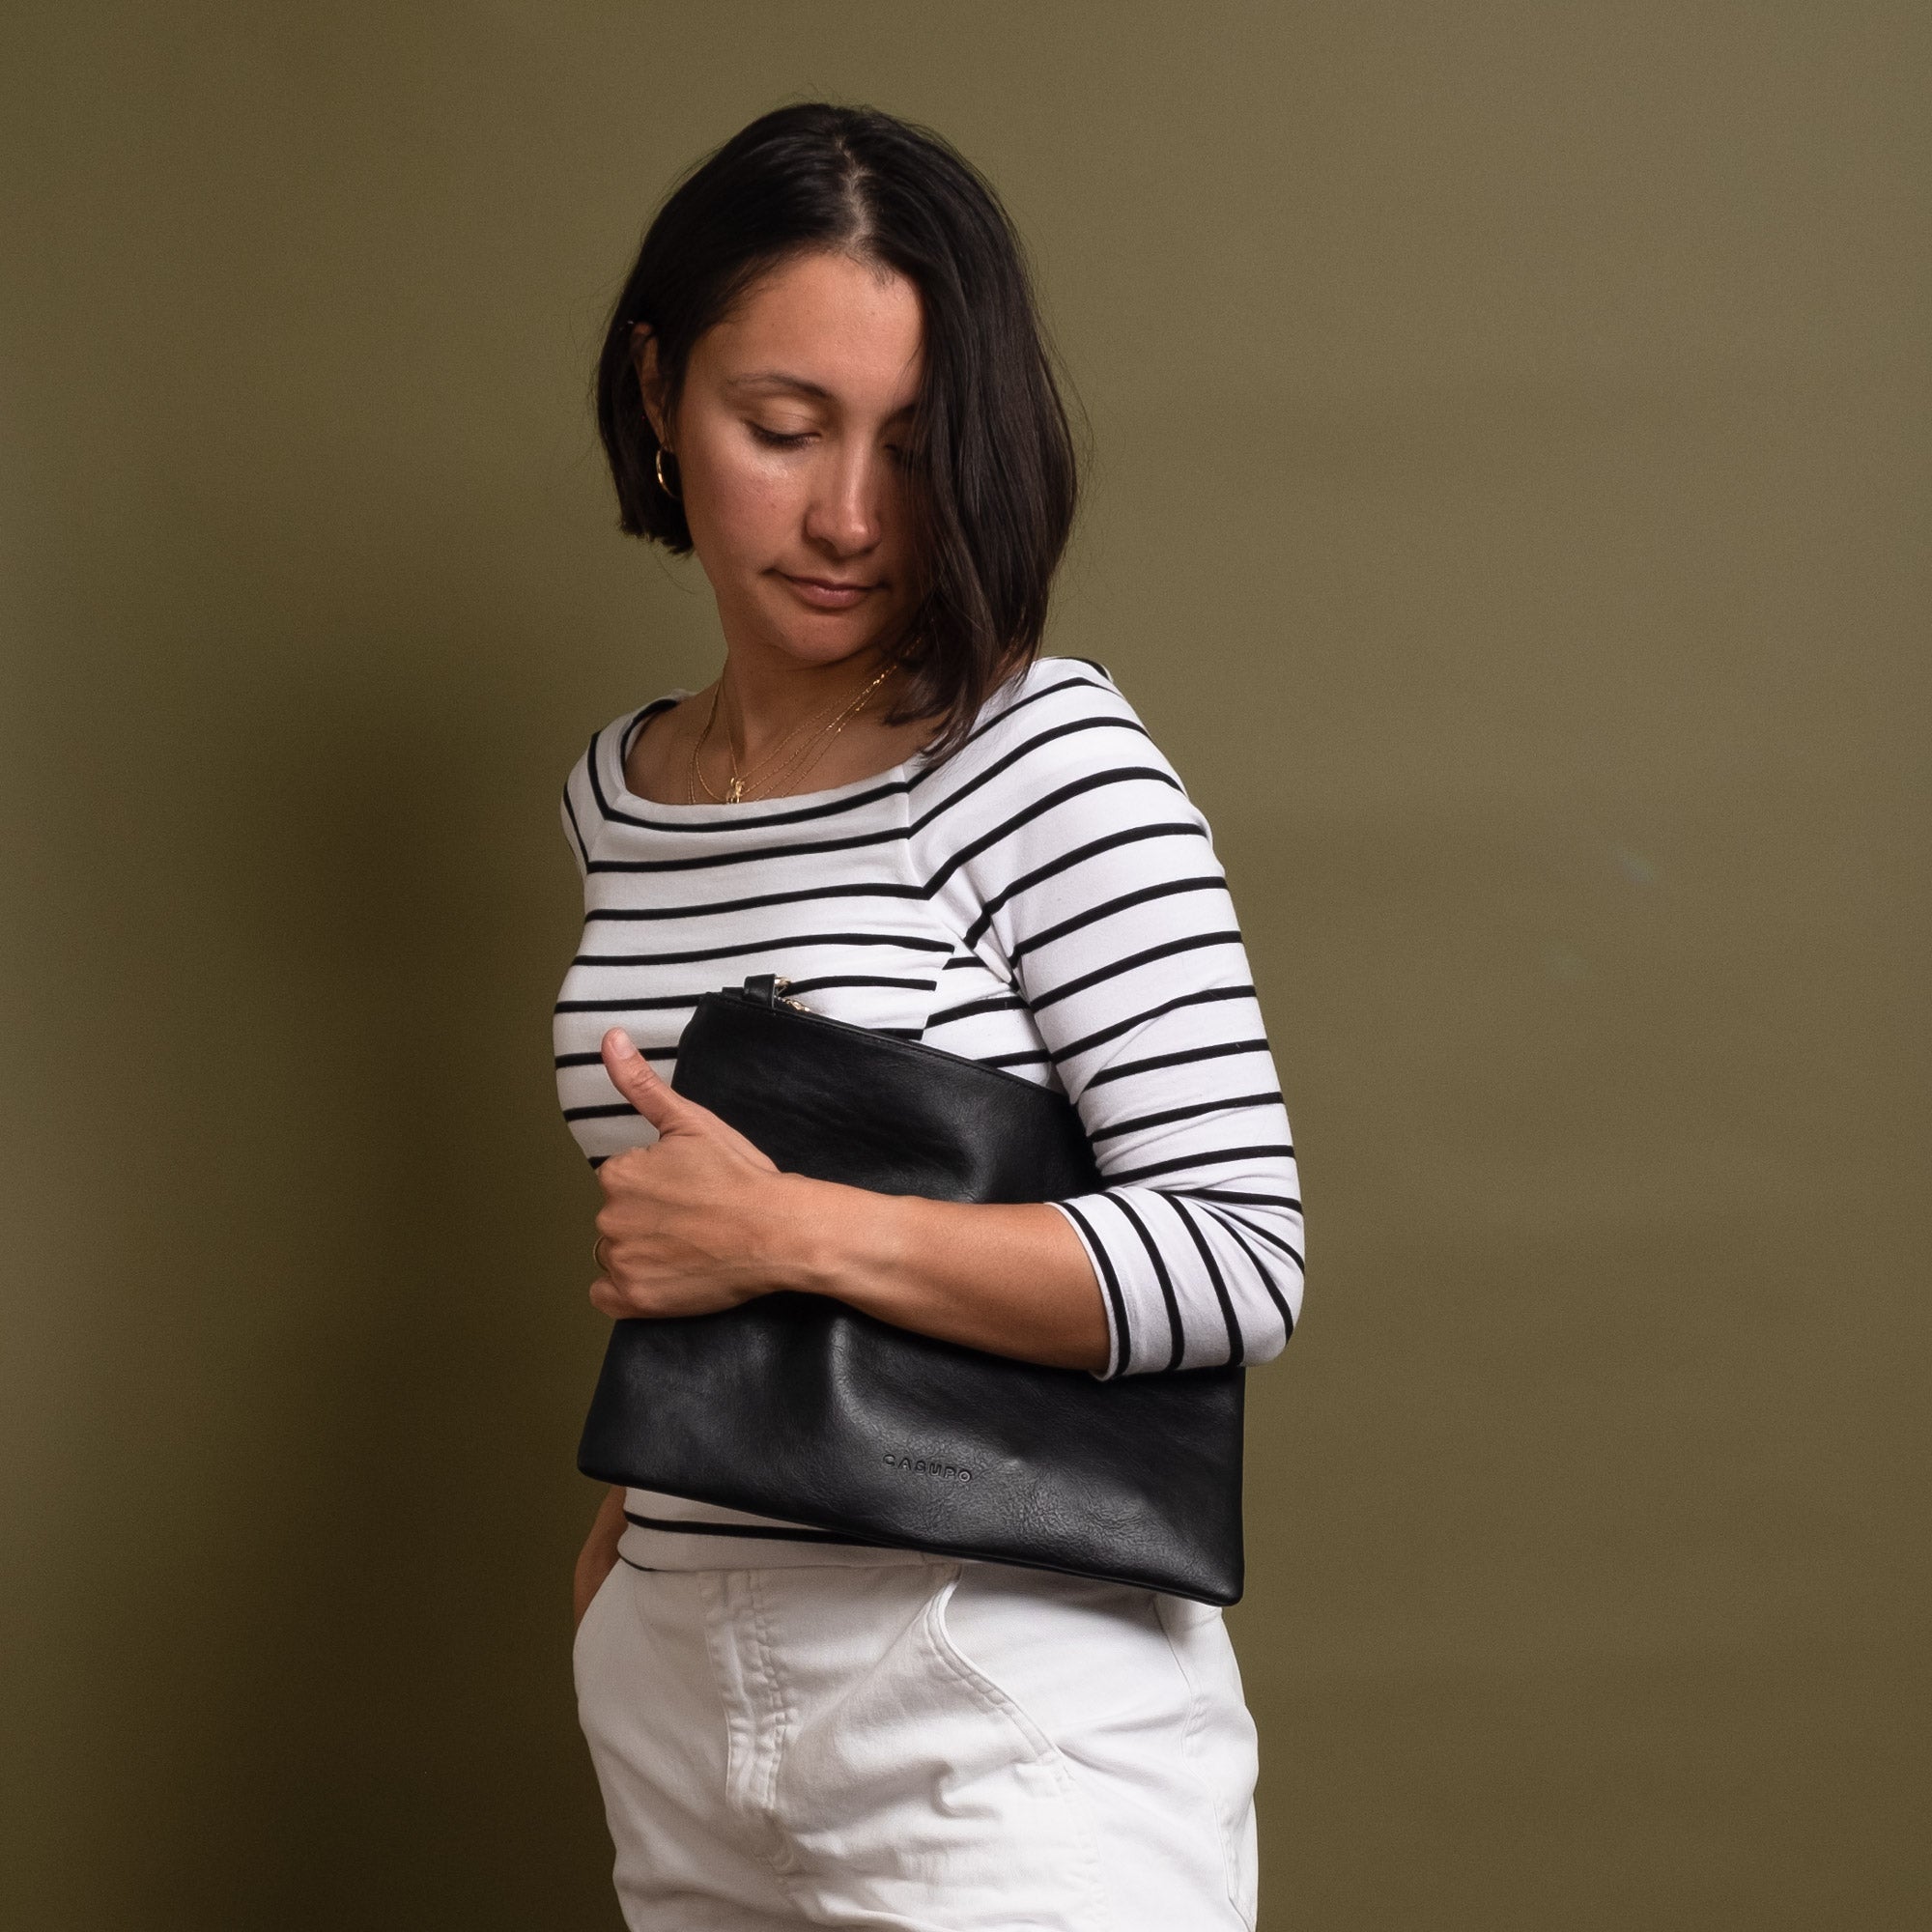 Woman wearing black leather clutch under her arm. She is wearing a white and black striped top and white jeans